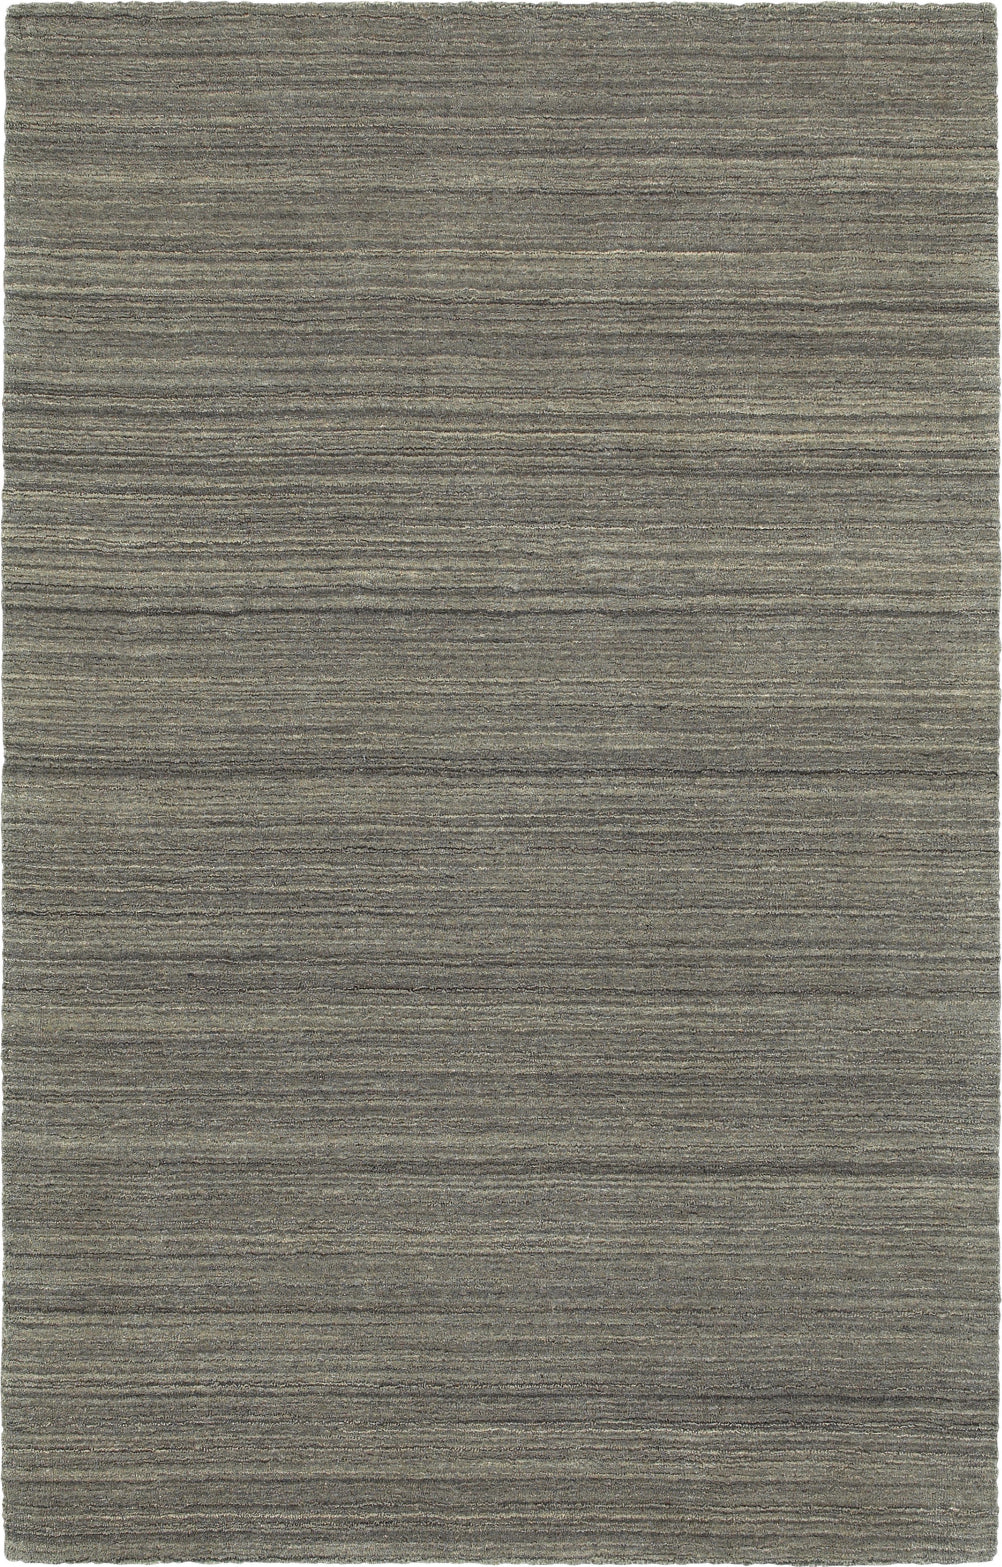 Oriental Weavers Infused 67000 Charcoal/ Charcoal Area Rug main image featured